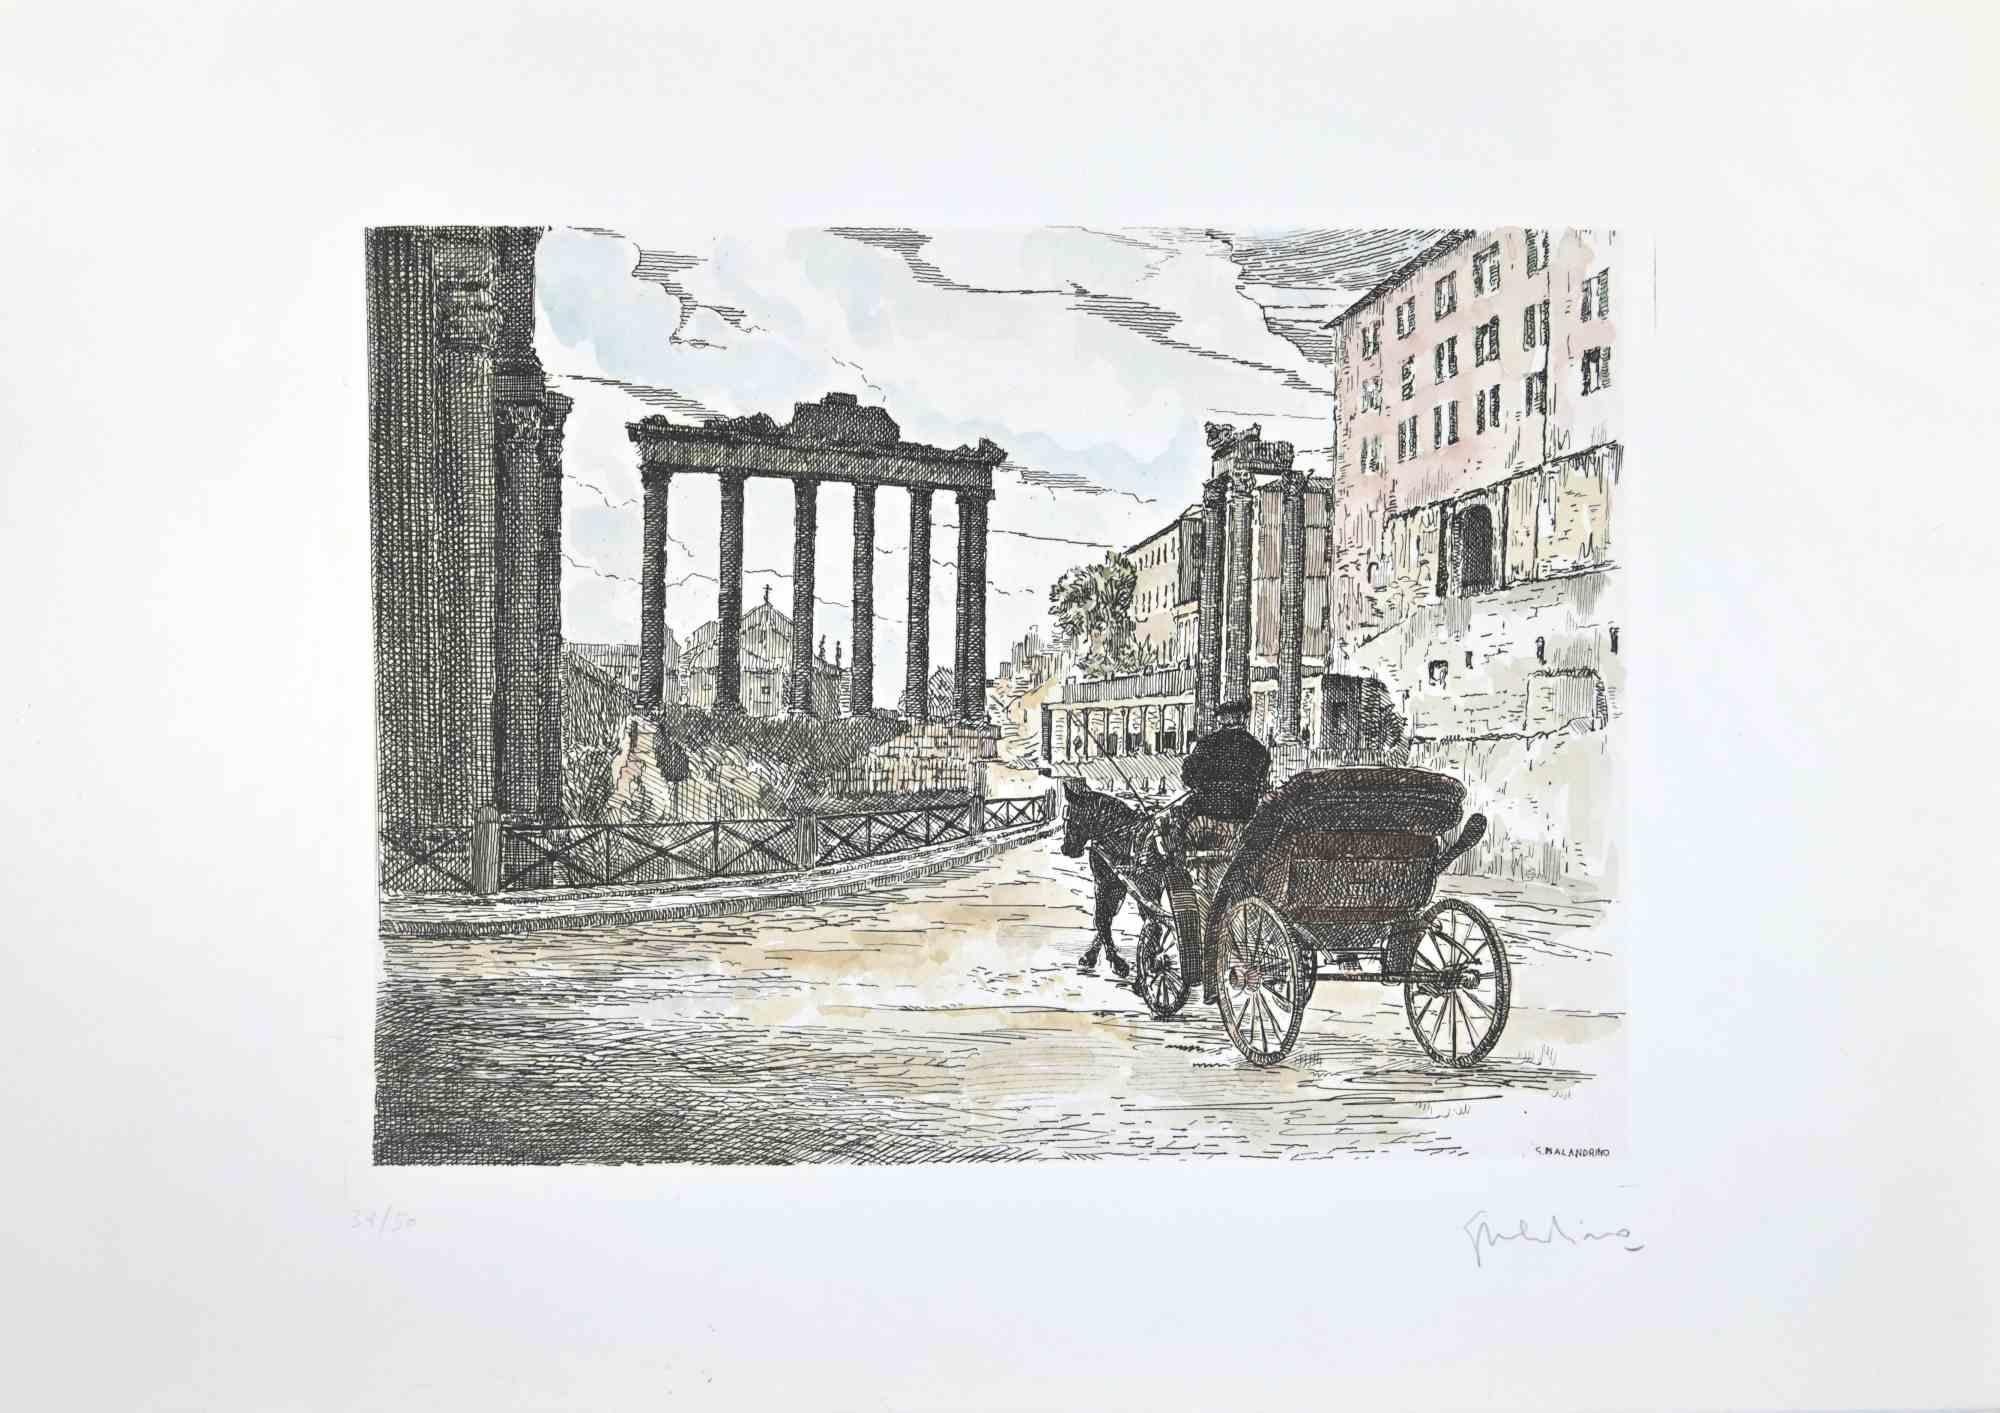 Roman Forum is an artwork realized by Giuseppe Malandrino.

Print in etching technique and hand watercolored.

Hand-signed by the artist in pencil on the lower right corner.

Numbered edition,38/50.

Good condition.

This artwork represents the